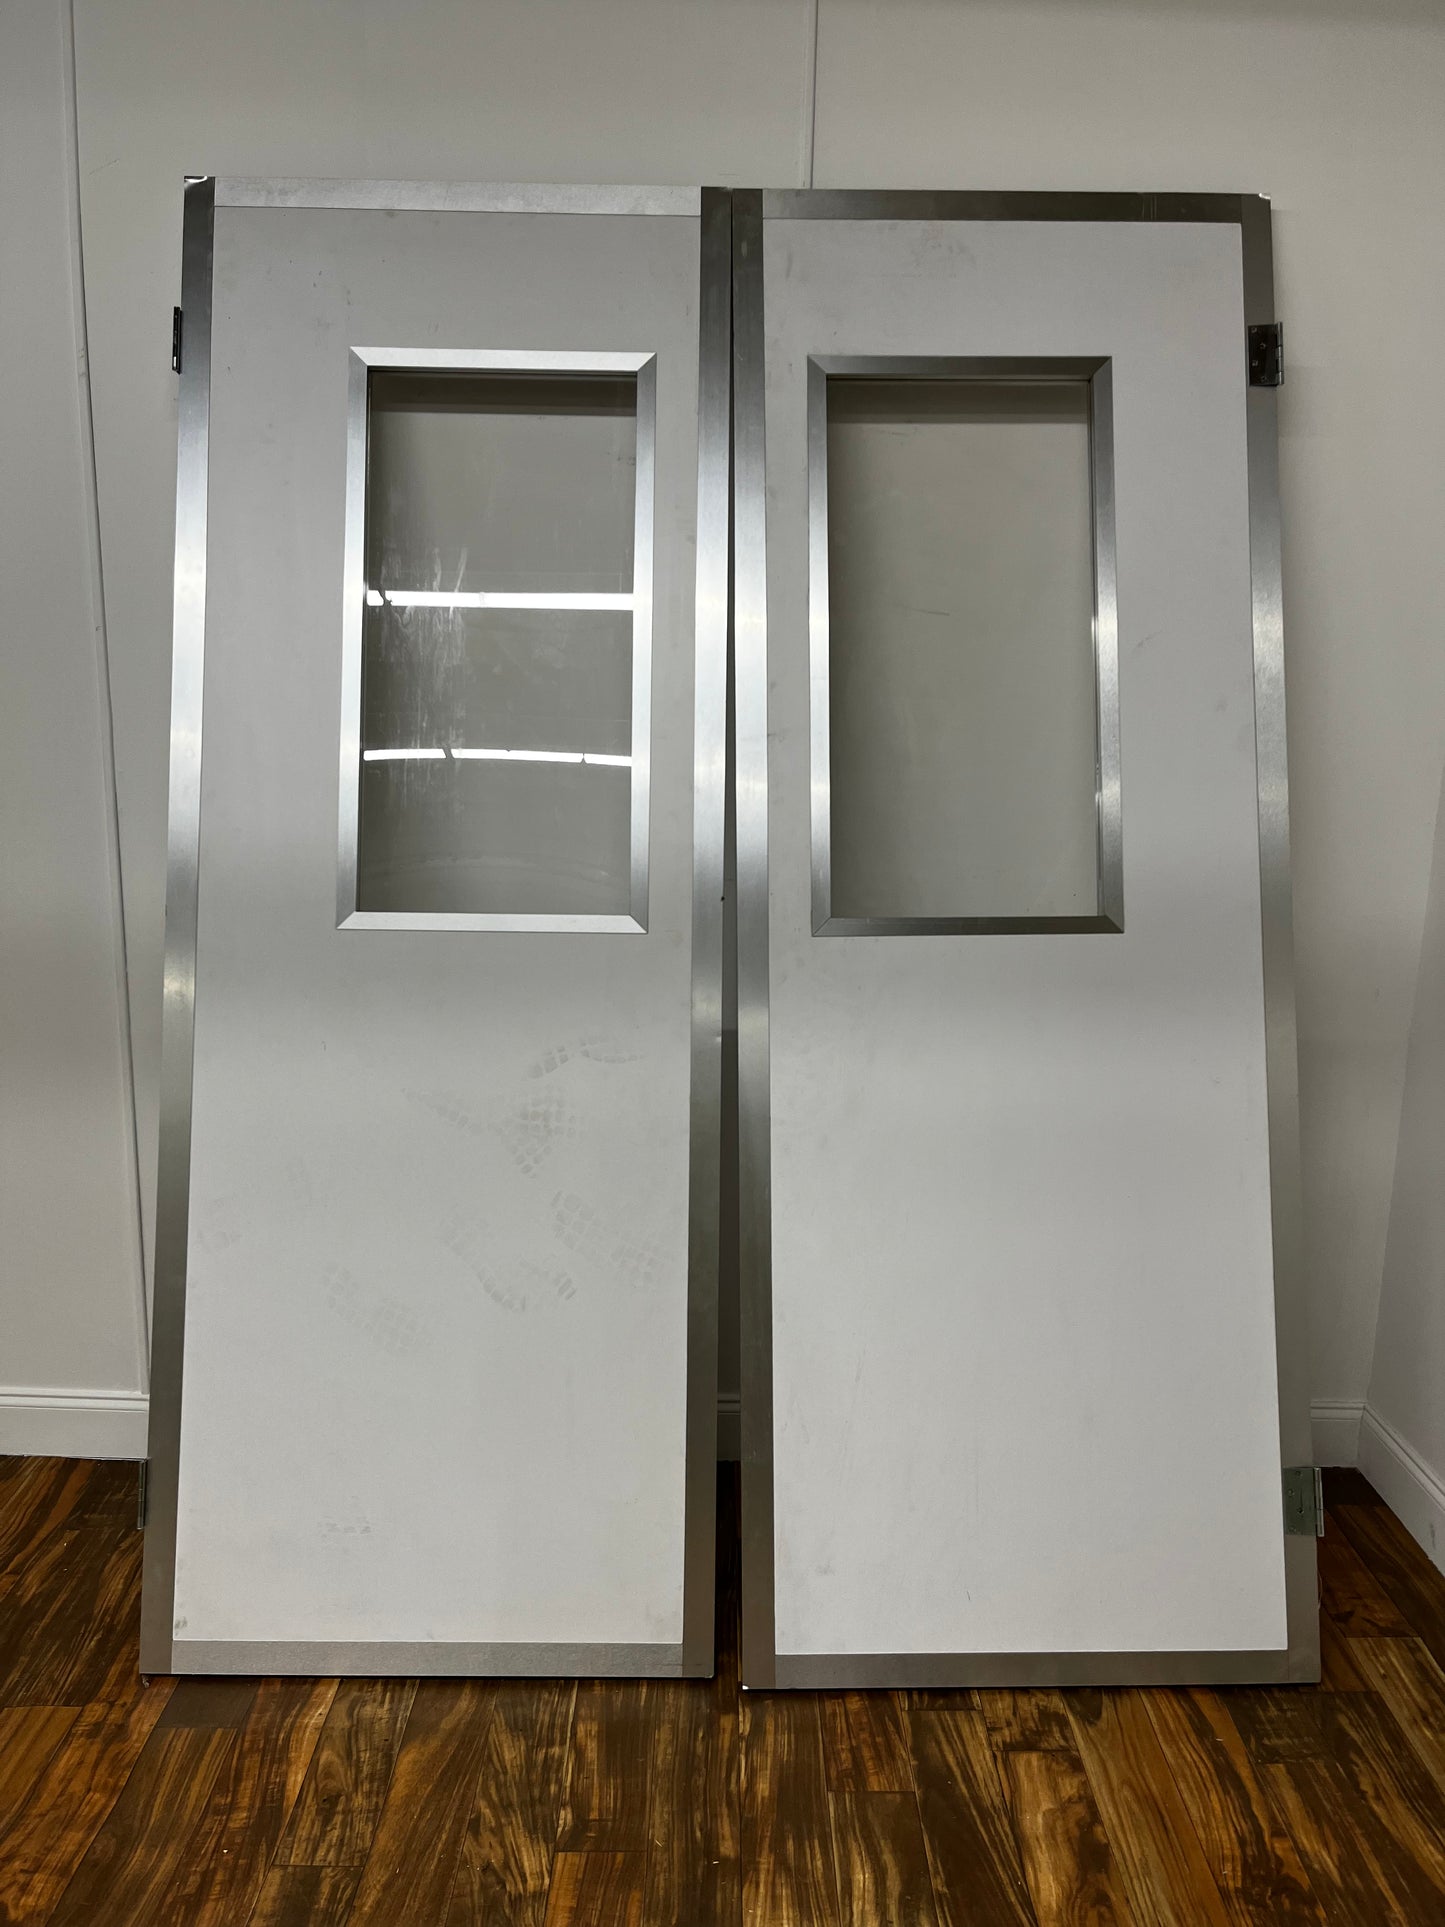 CHROME AND WHITE LAB DOORS WITH WINDOW